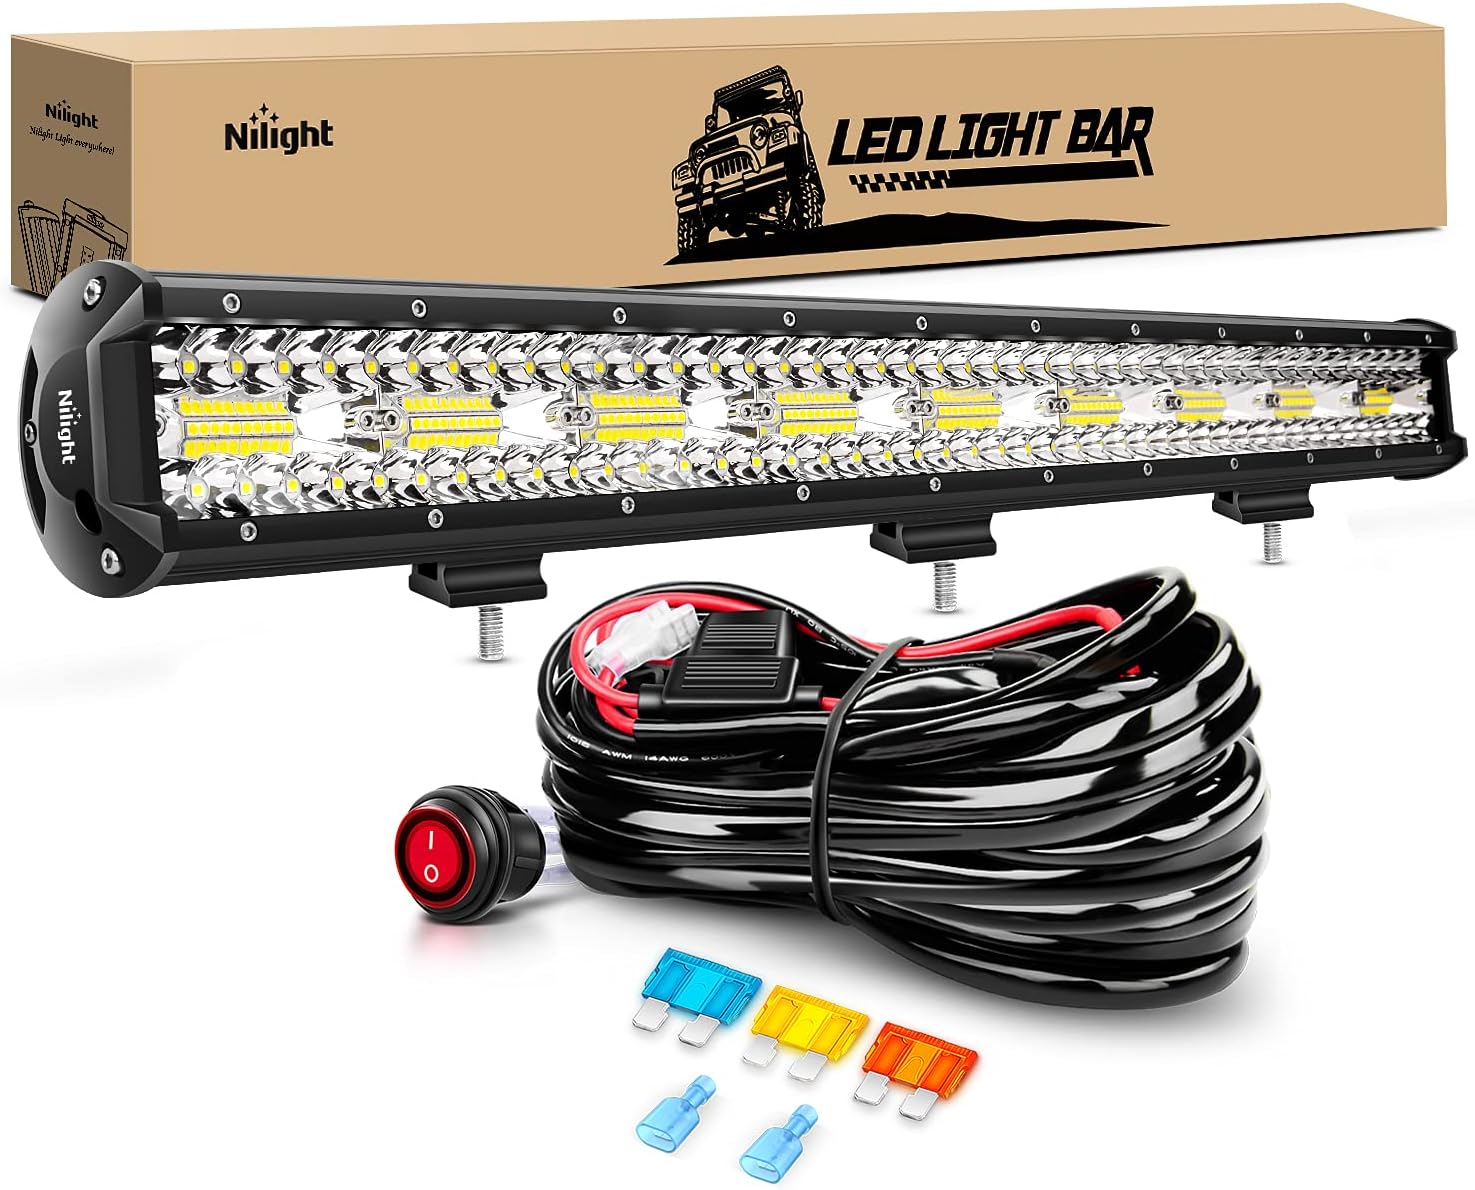 Exclusive Promo: Snag Your Discount Today! Nilight Led Light Bar 26Inch 540W Triple Row 50000LM Flood Spot Combo Off Road Driving Lights with 14AWG Heavy Duty Wiring Harness for Boat Truck Jeep UTV ATV Car, 2 Years Warranty